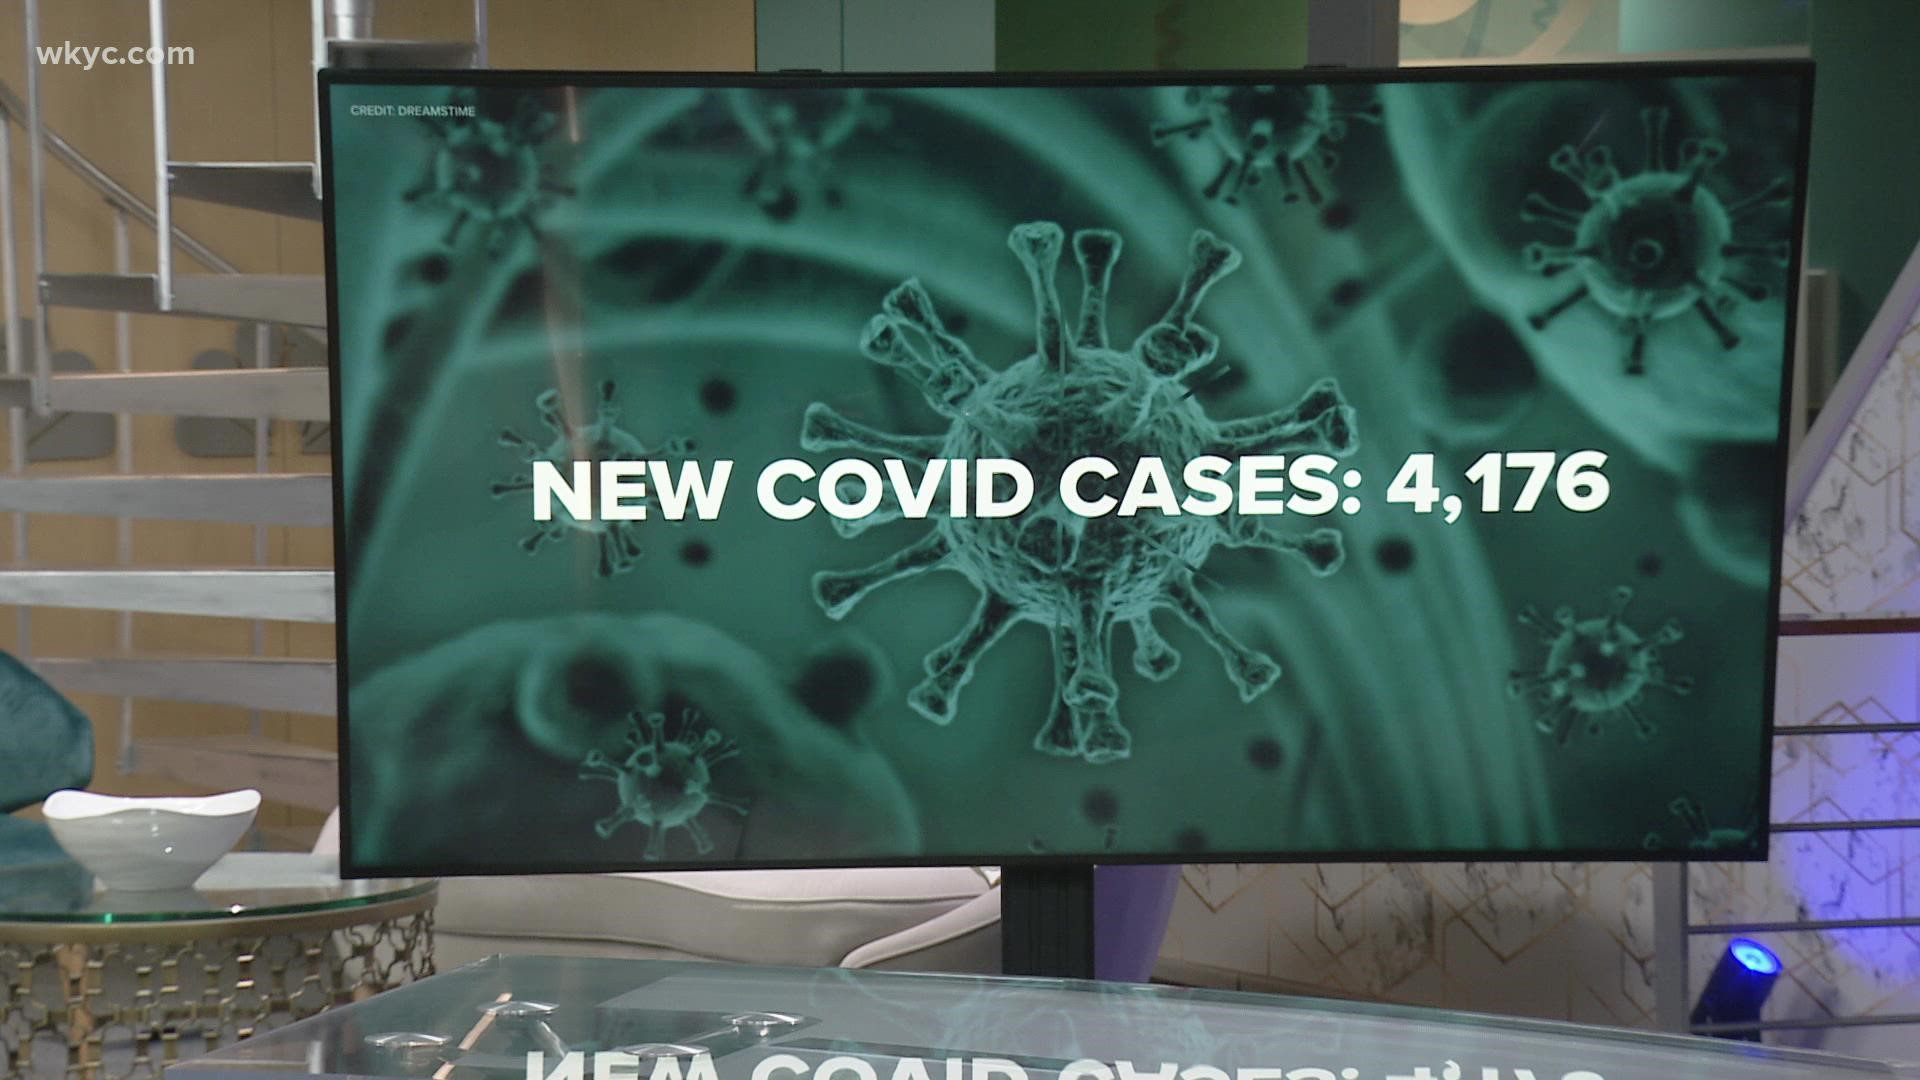 Ohio’s 21-day average for new COVID-19 cases has declined to 8,675, according to data released at 2 p.m.